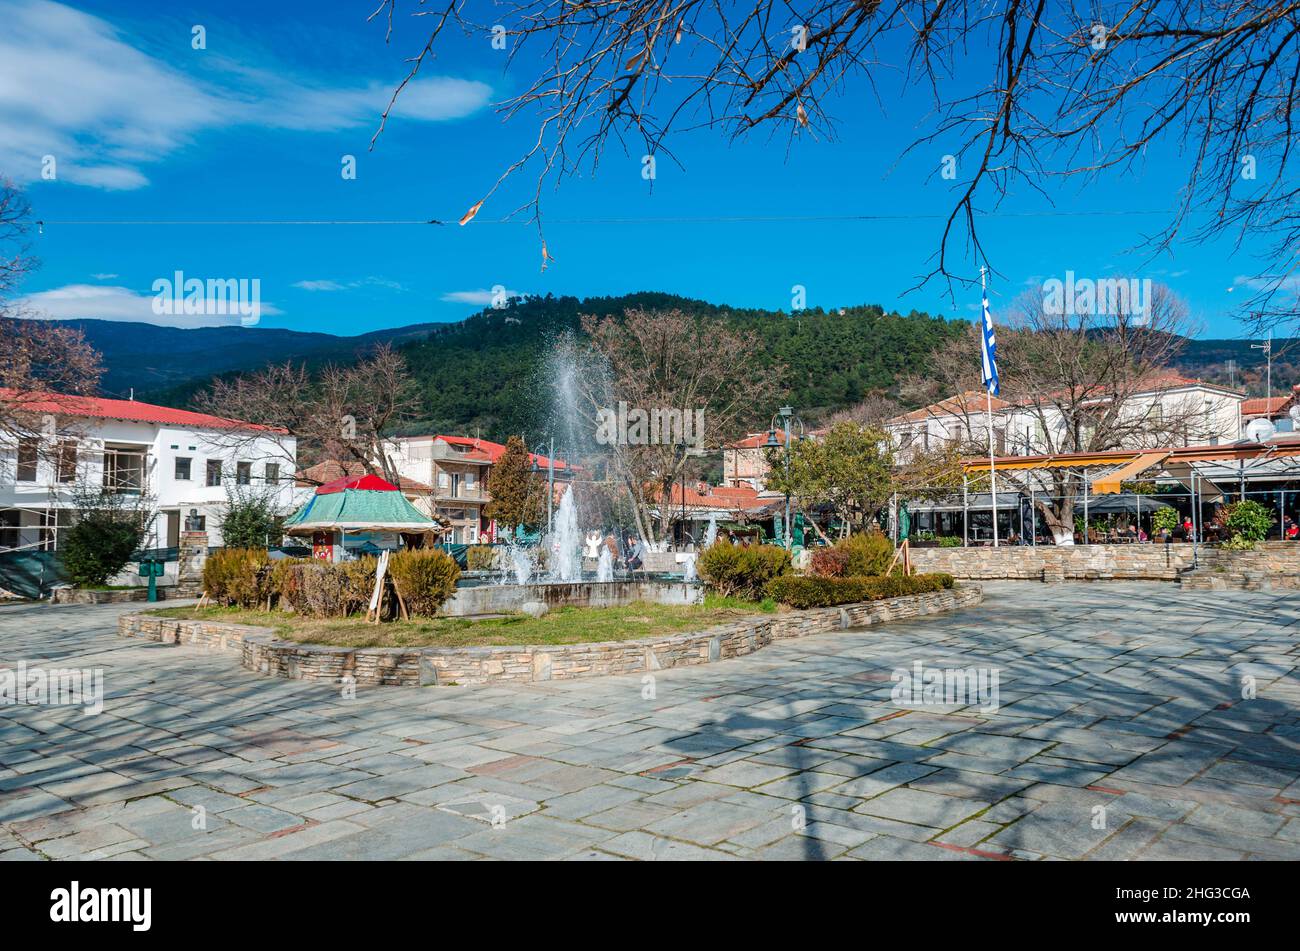 Agia, is a settlement of Larissa region unit, built on the slopes of Mount Kissavos. Stock Photo